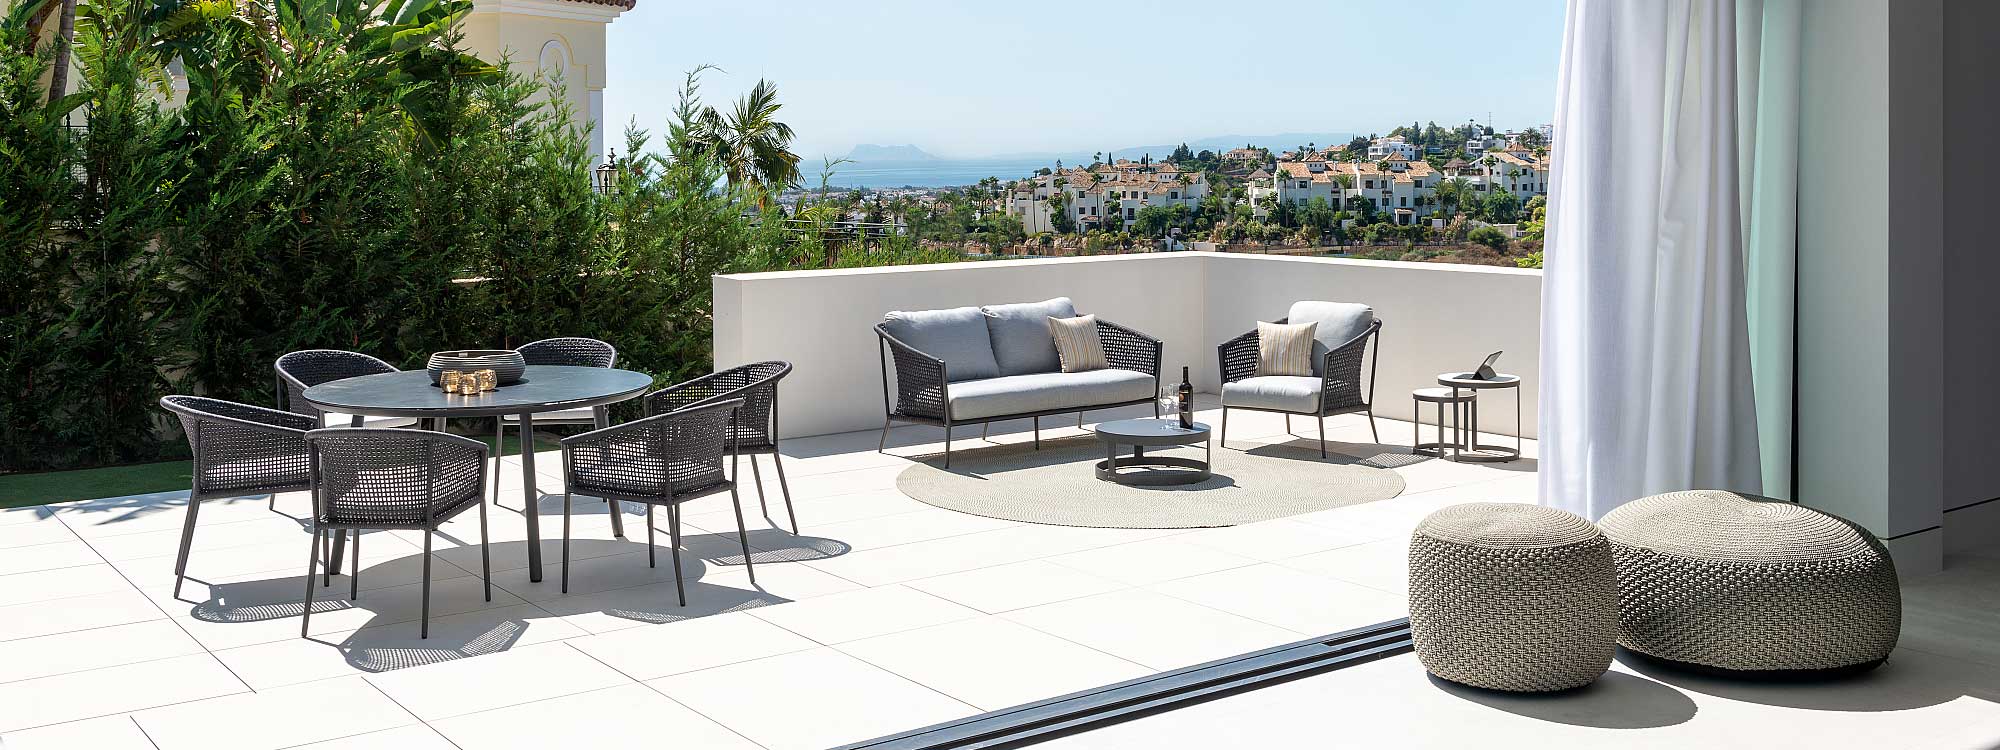 Image of Durham circular garden table with Jati & Kebon furniture, shown on a Spanish terrace with rooftops, sea and Gibraltar in the background